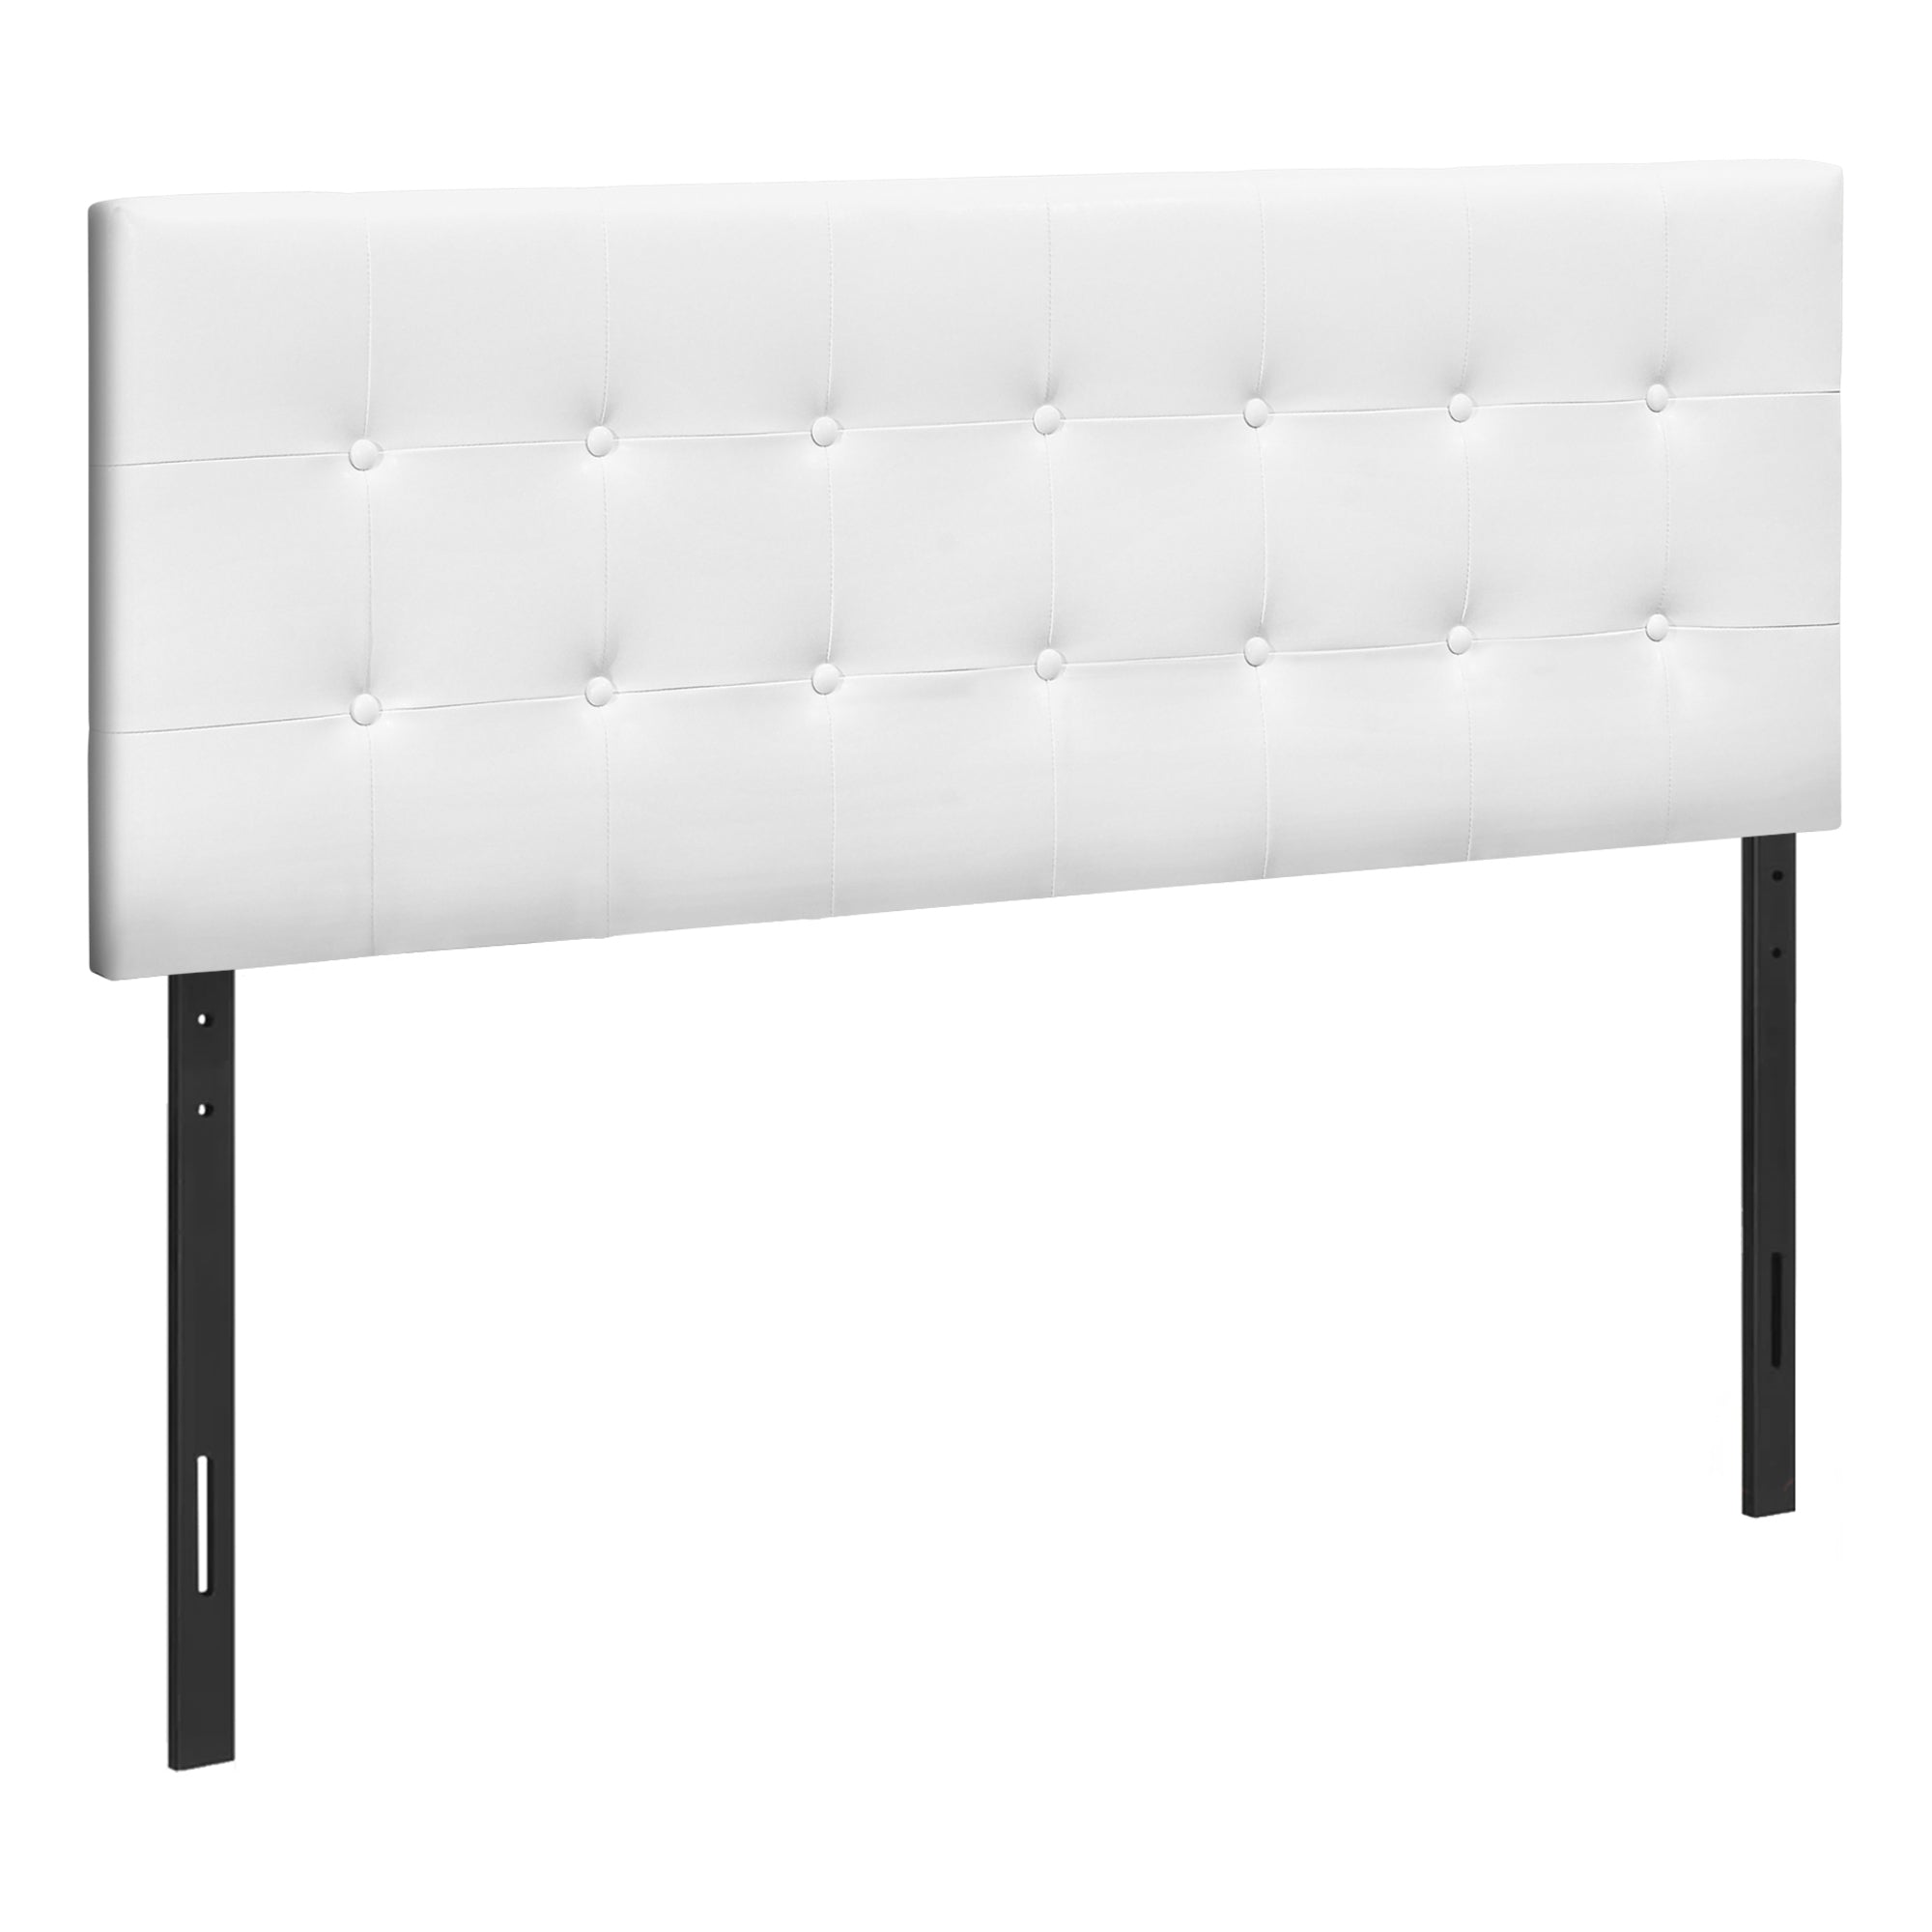 MN-406002Q    Headboard, Bedroom, Queen Size, Upholstered, Leather Look, Wooden Frame, White, Black, Contemporary, Modern